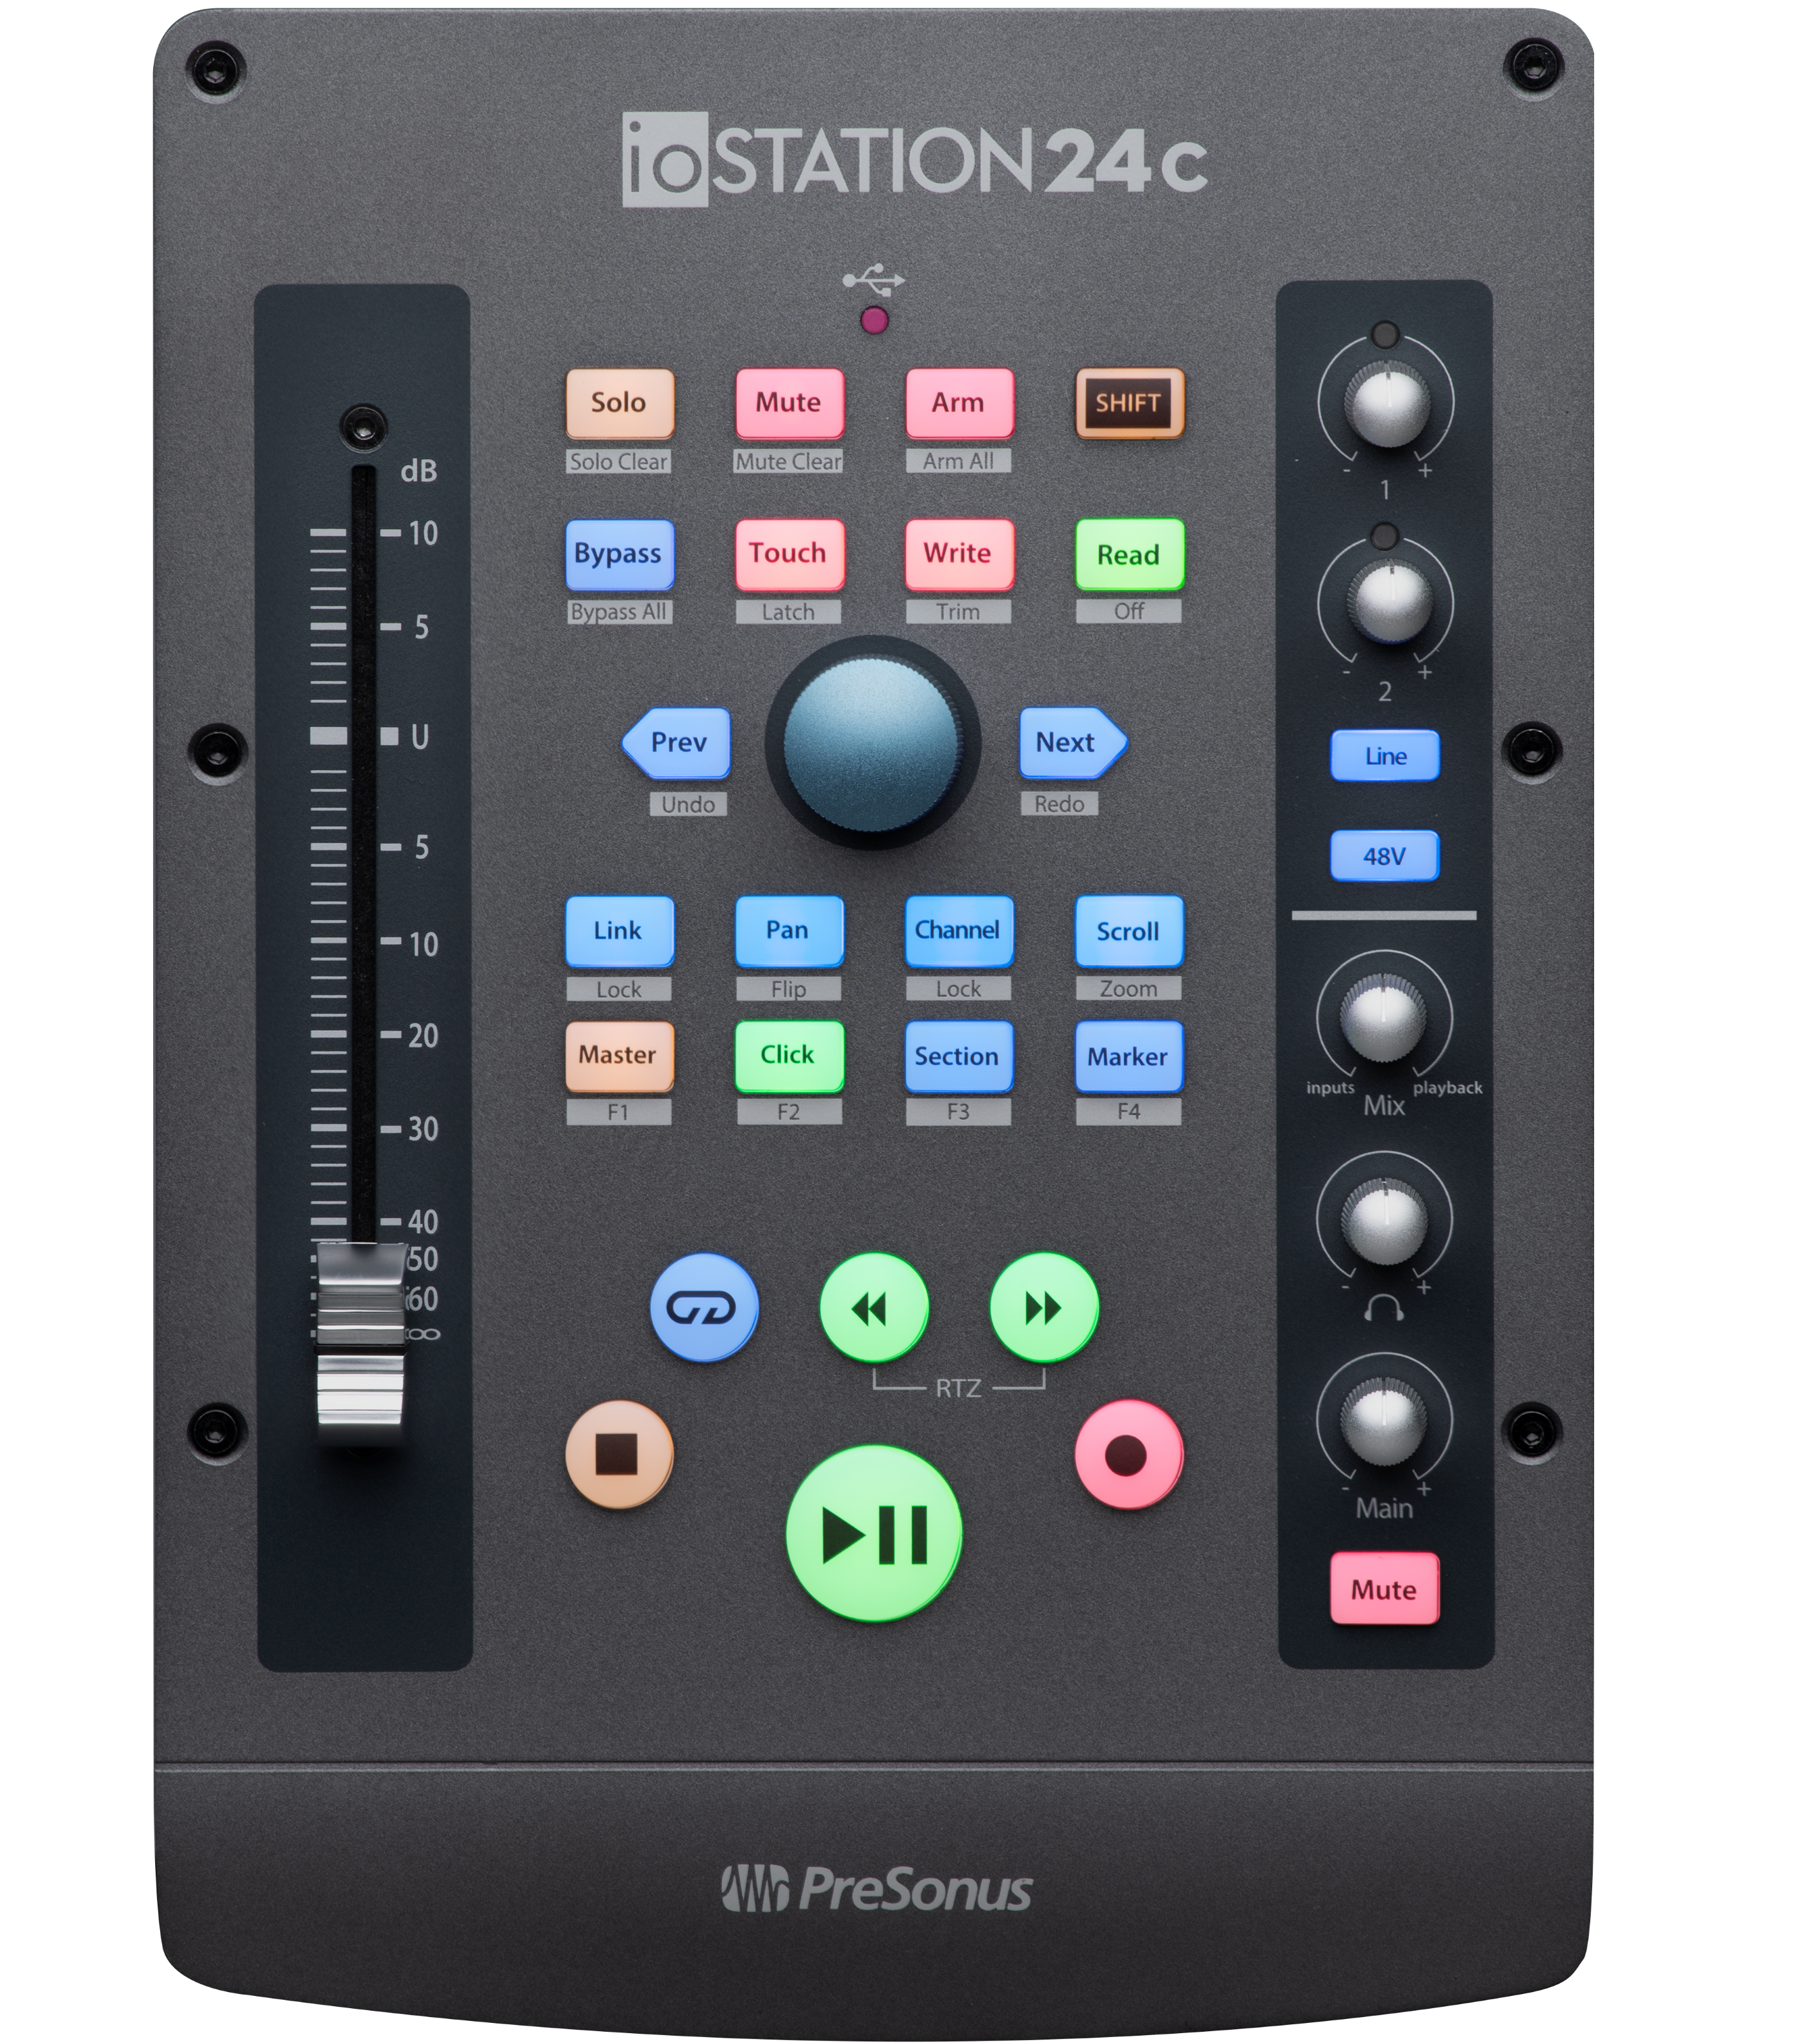 PreSonus ioStation 24c Compatible Audio Interface and Production Controller